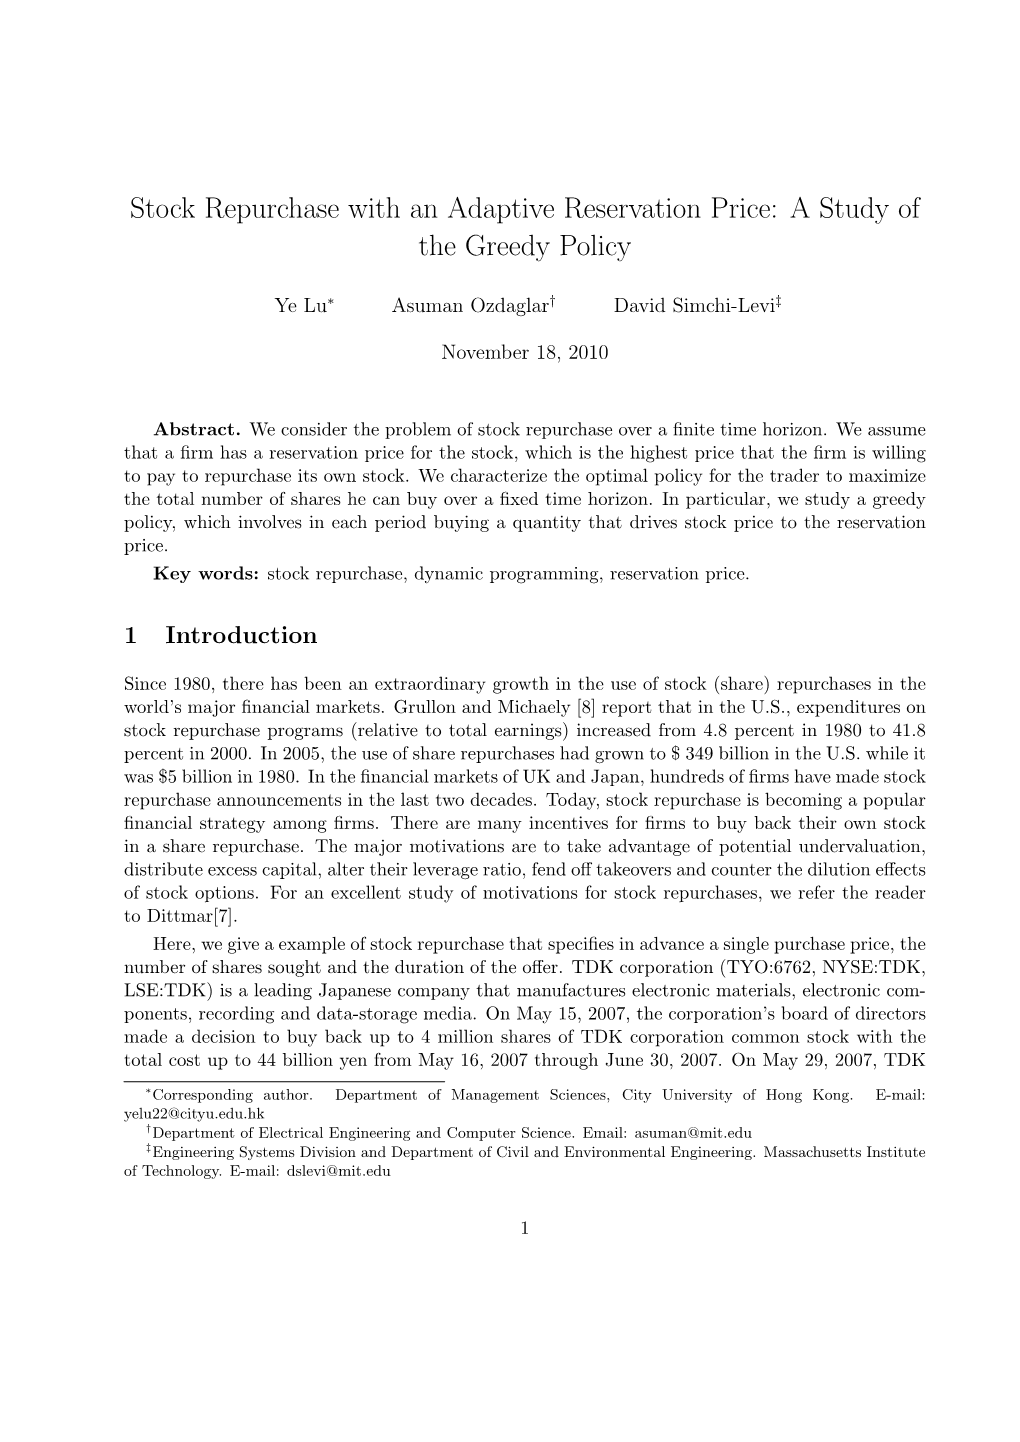 Stock Repurchase with an Adaptive Reservation Price: a Study of the Greedy Policy